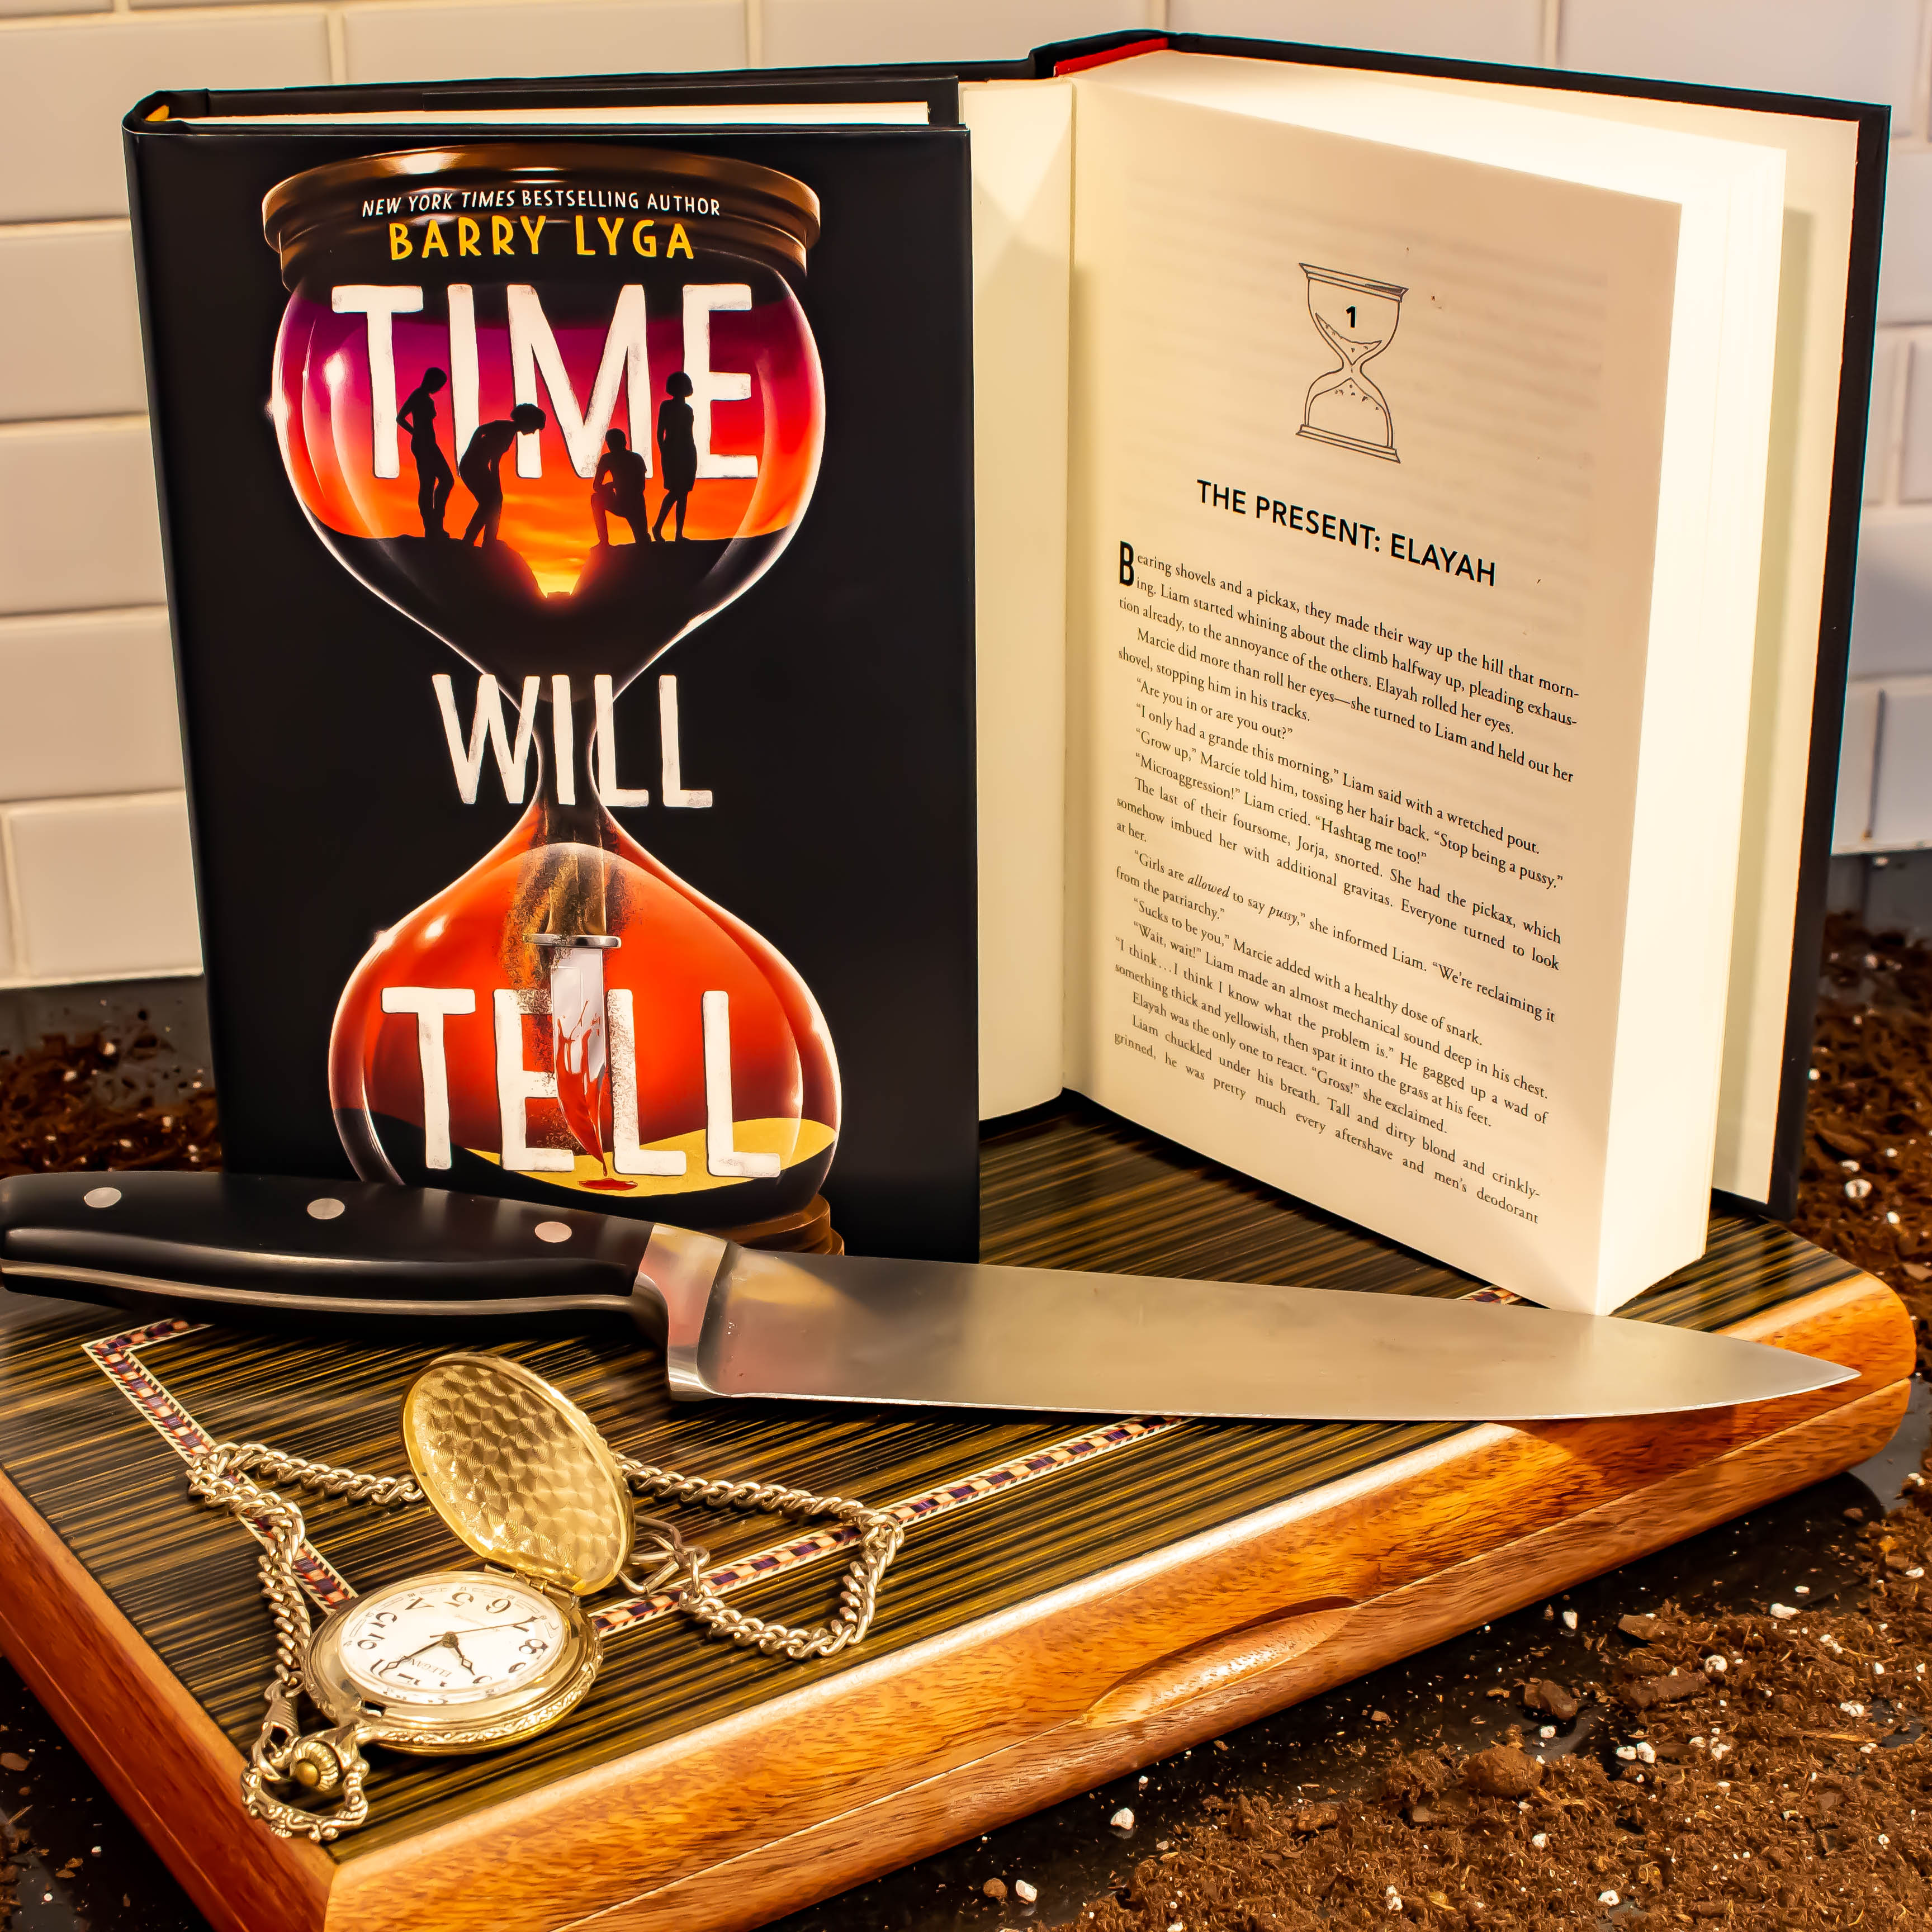 Instagram image of book cover for 'Time Will Tell' by Barry Lyga